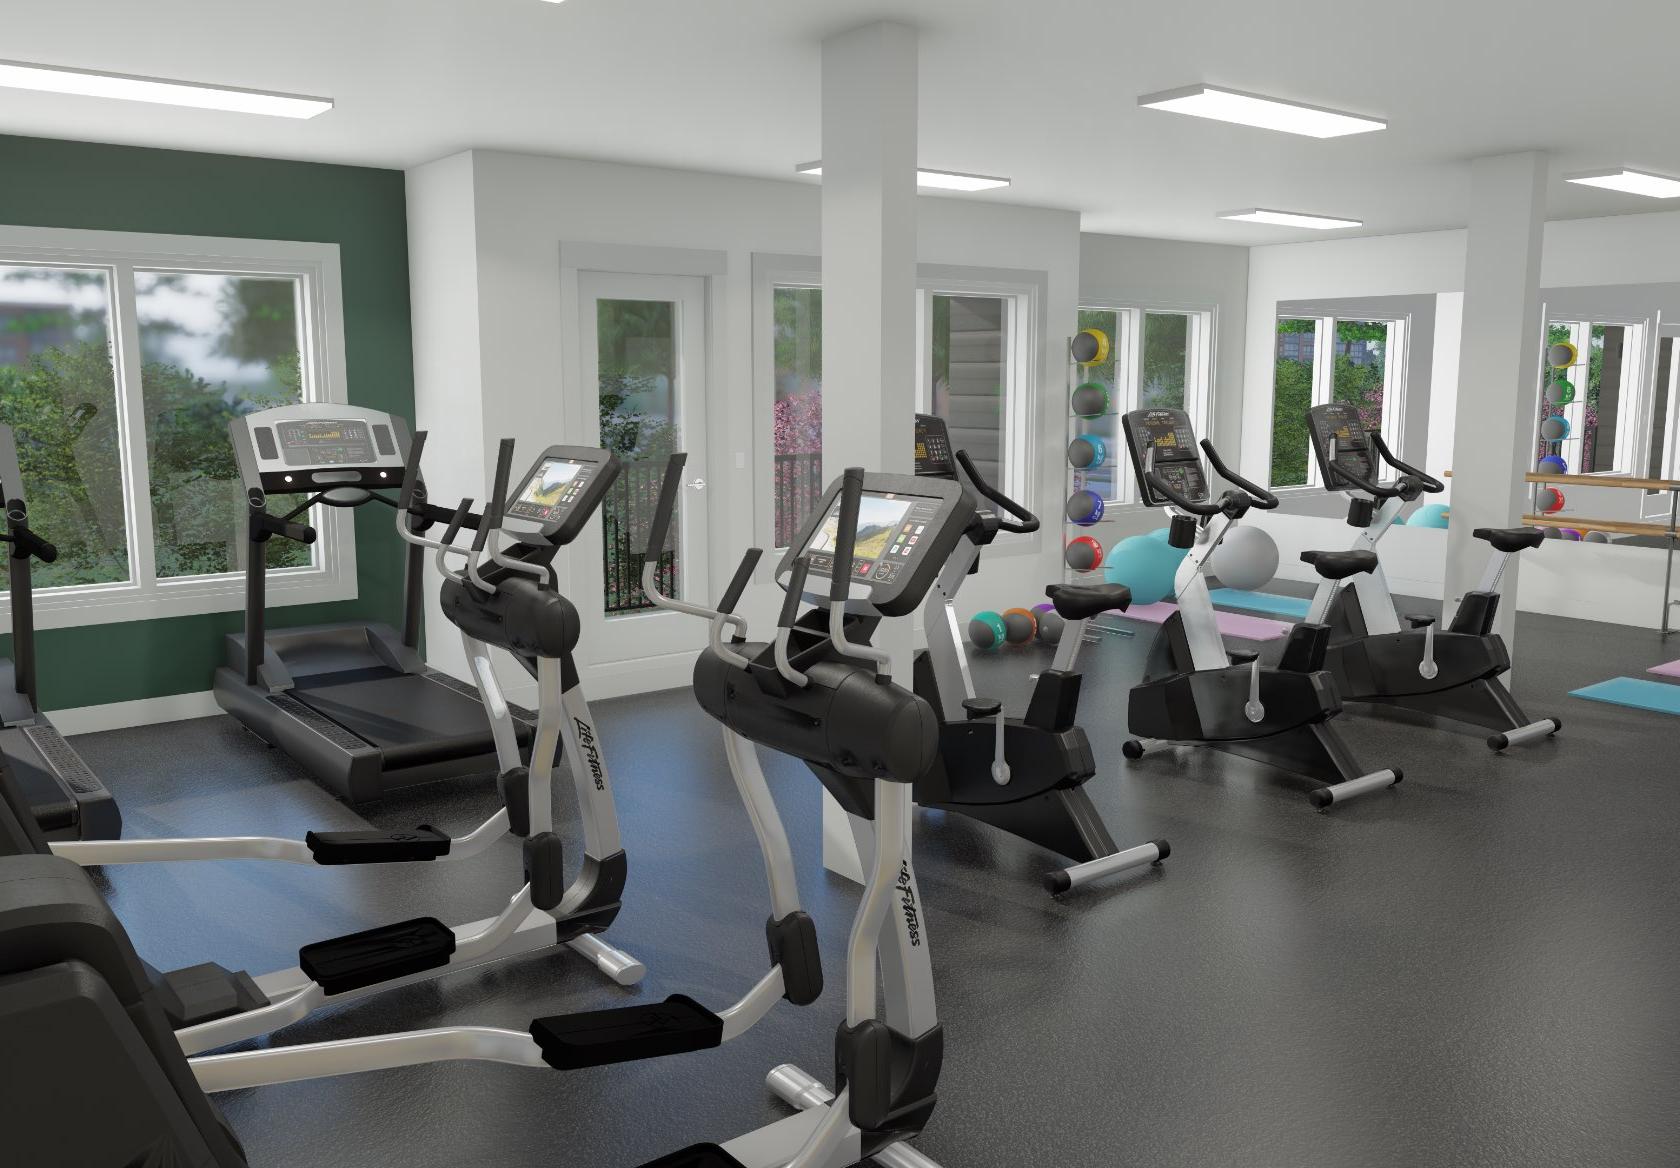 Onsite fitness room with cardio machines, weight training equipment and a yoga studio.